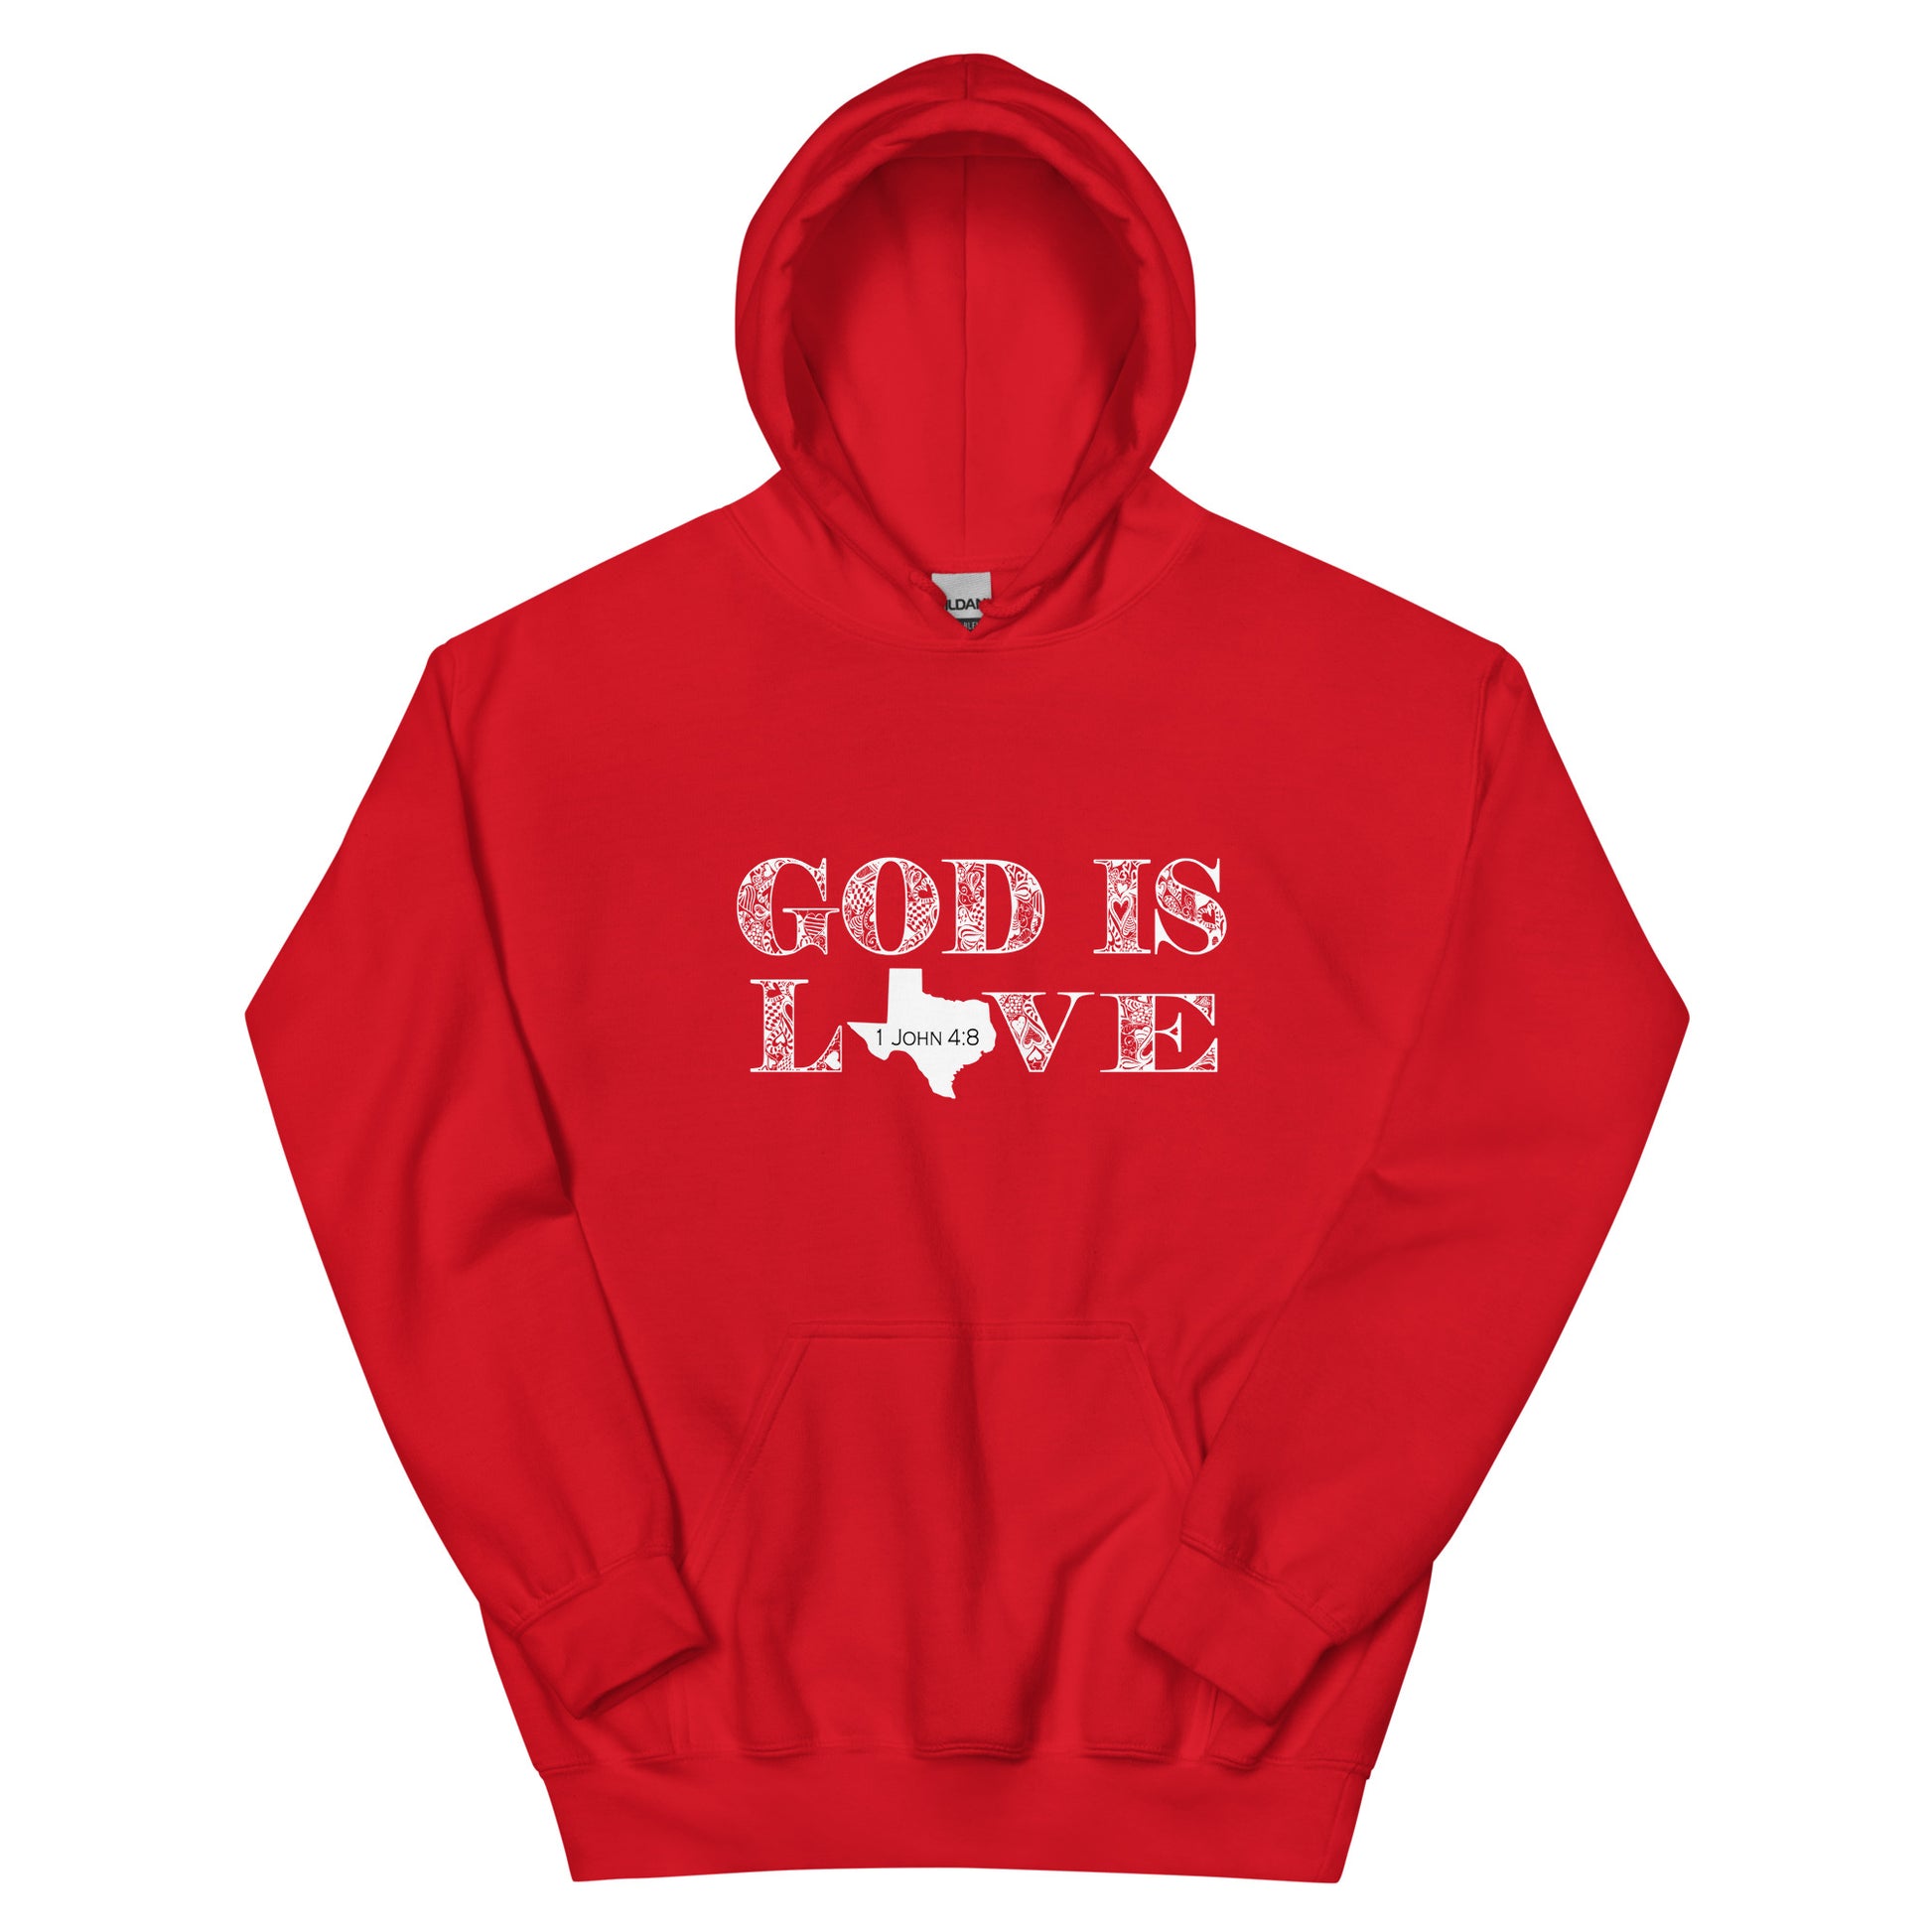 1 John 4:8 God Is Love Unisex Texas Hoodie in Red - front view with hood up